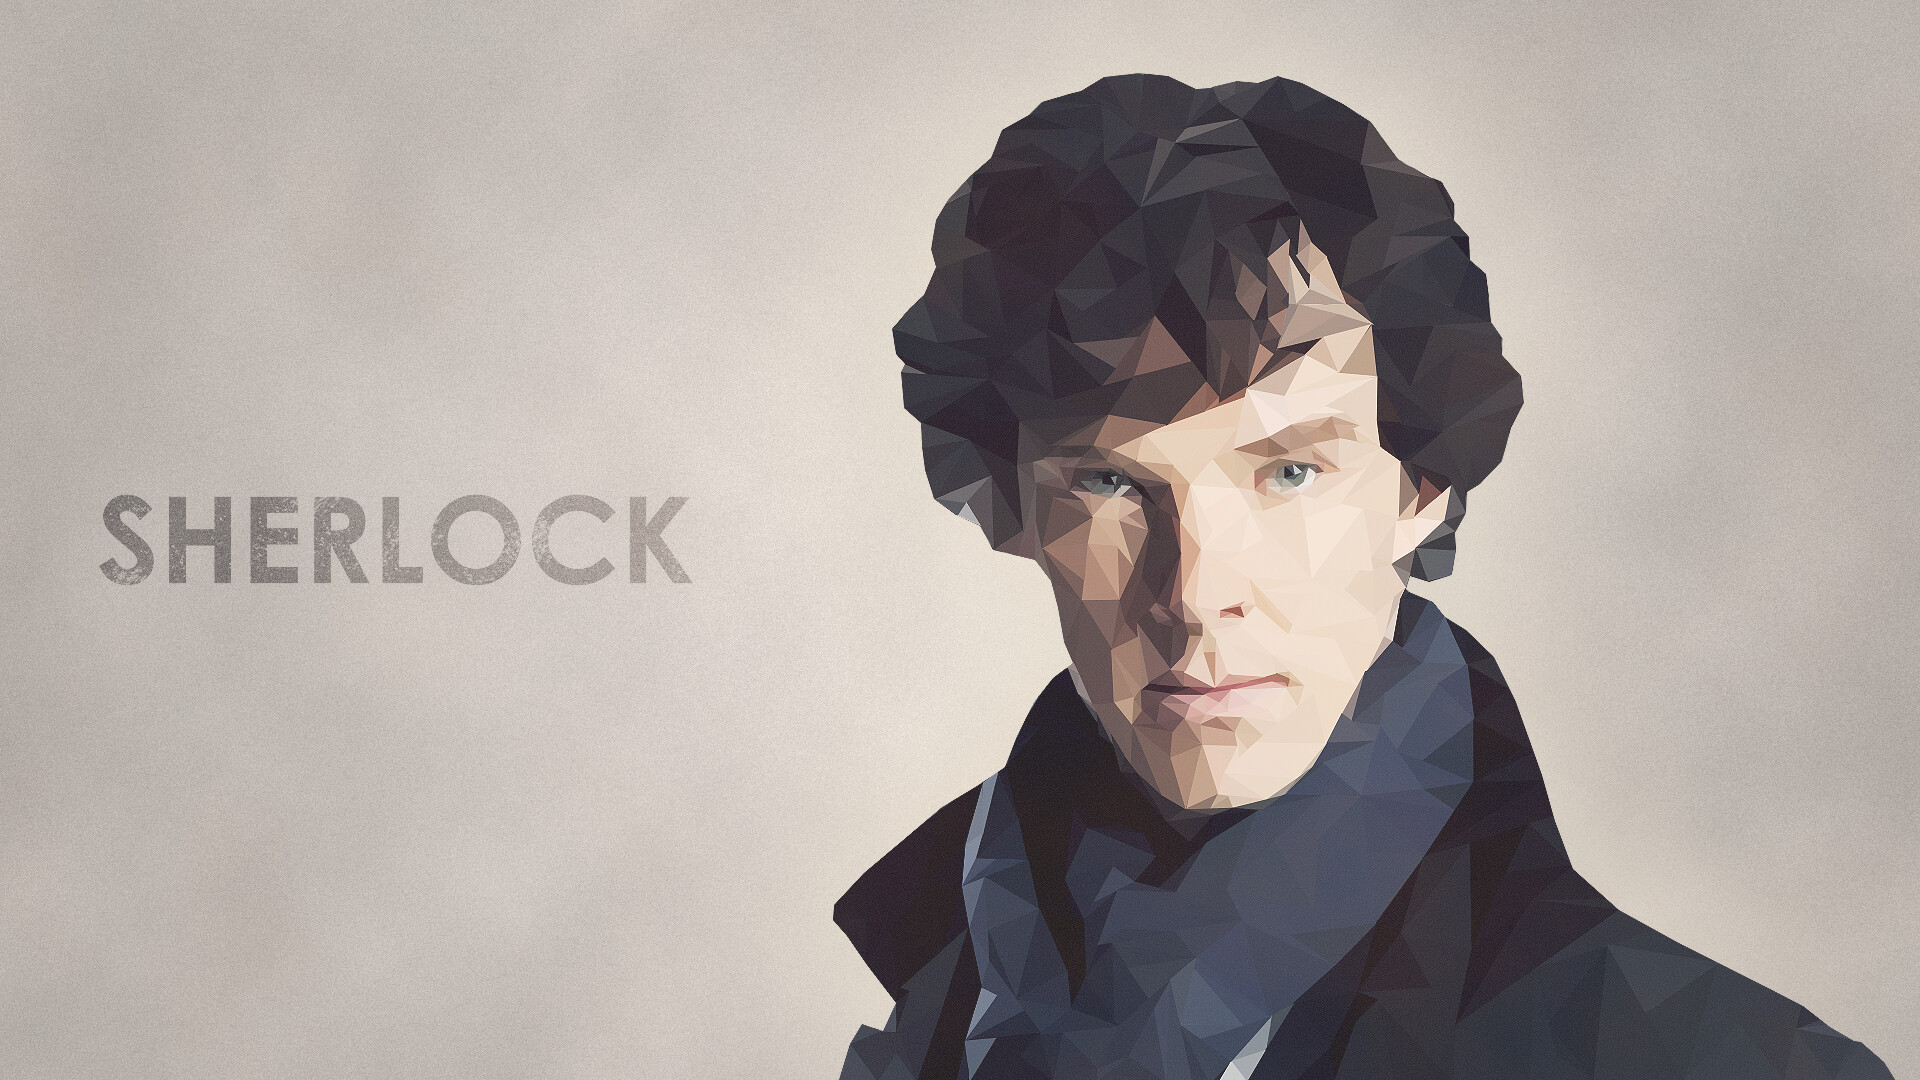 Sherlock (TV Series): Consultant Sherlock Holmes and Doctor John Watson investigate a series of connected cases and try to discover just who Moriarty is. 1920x1080 Full HD Background.